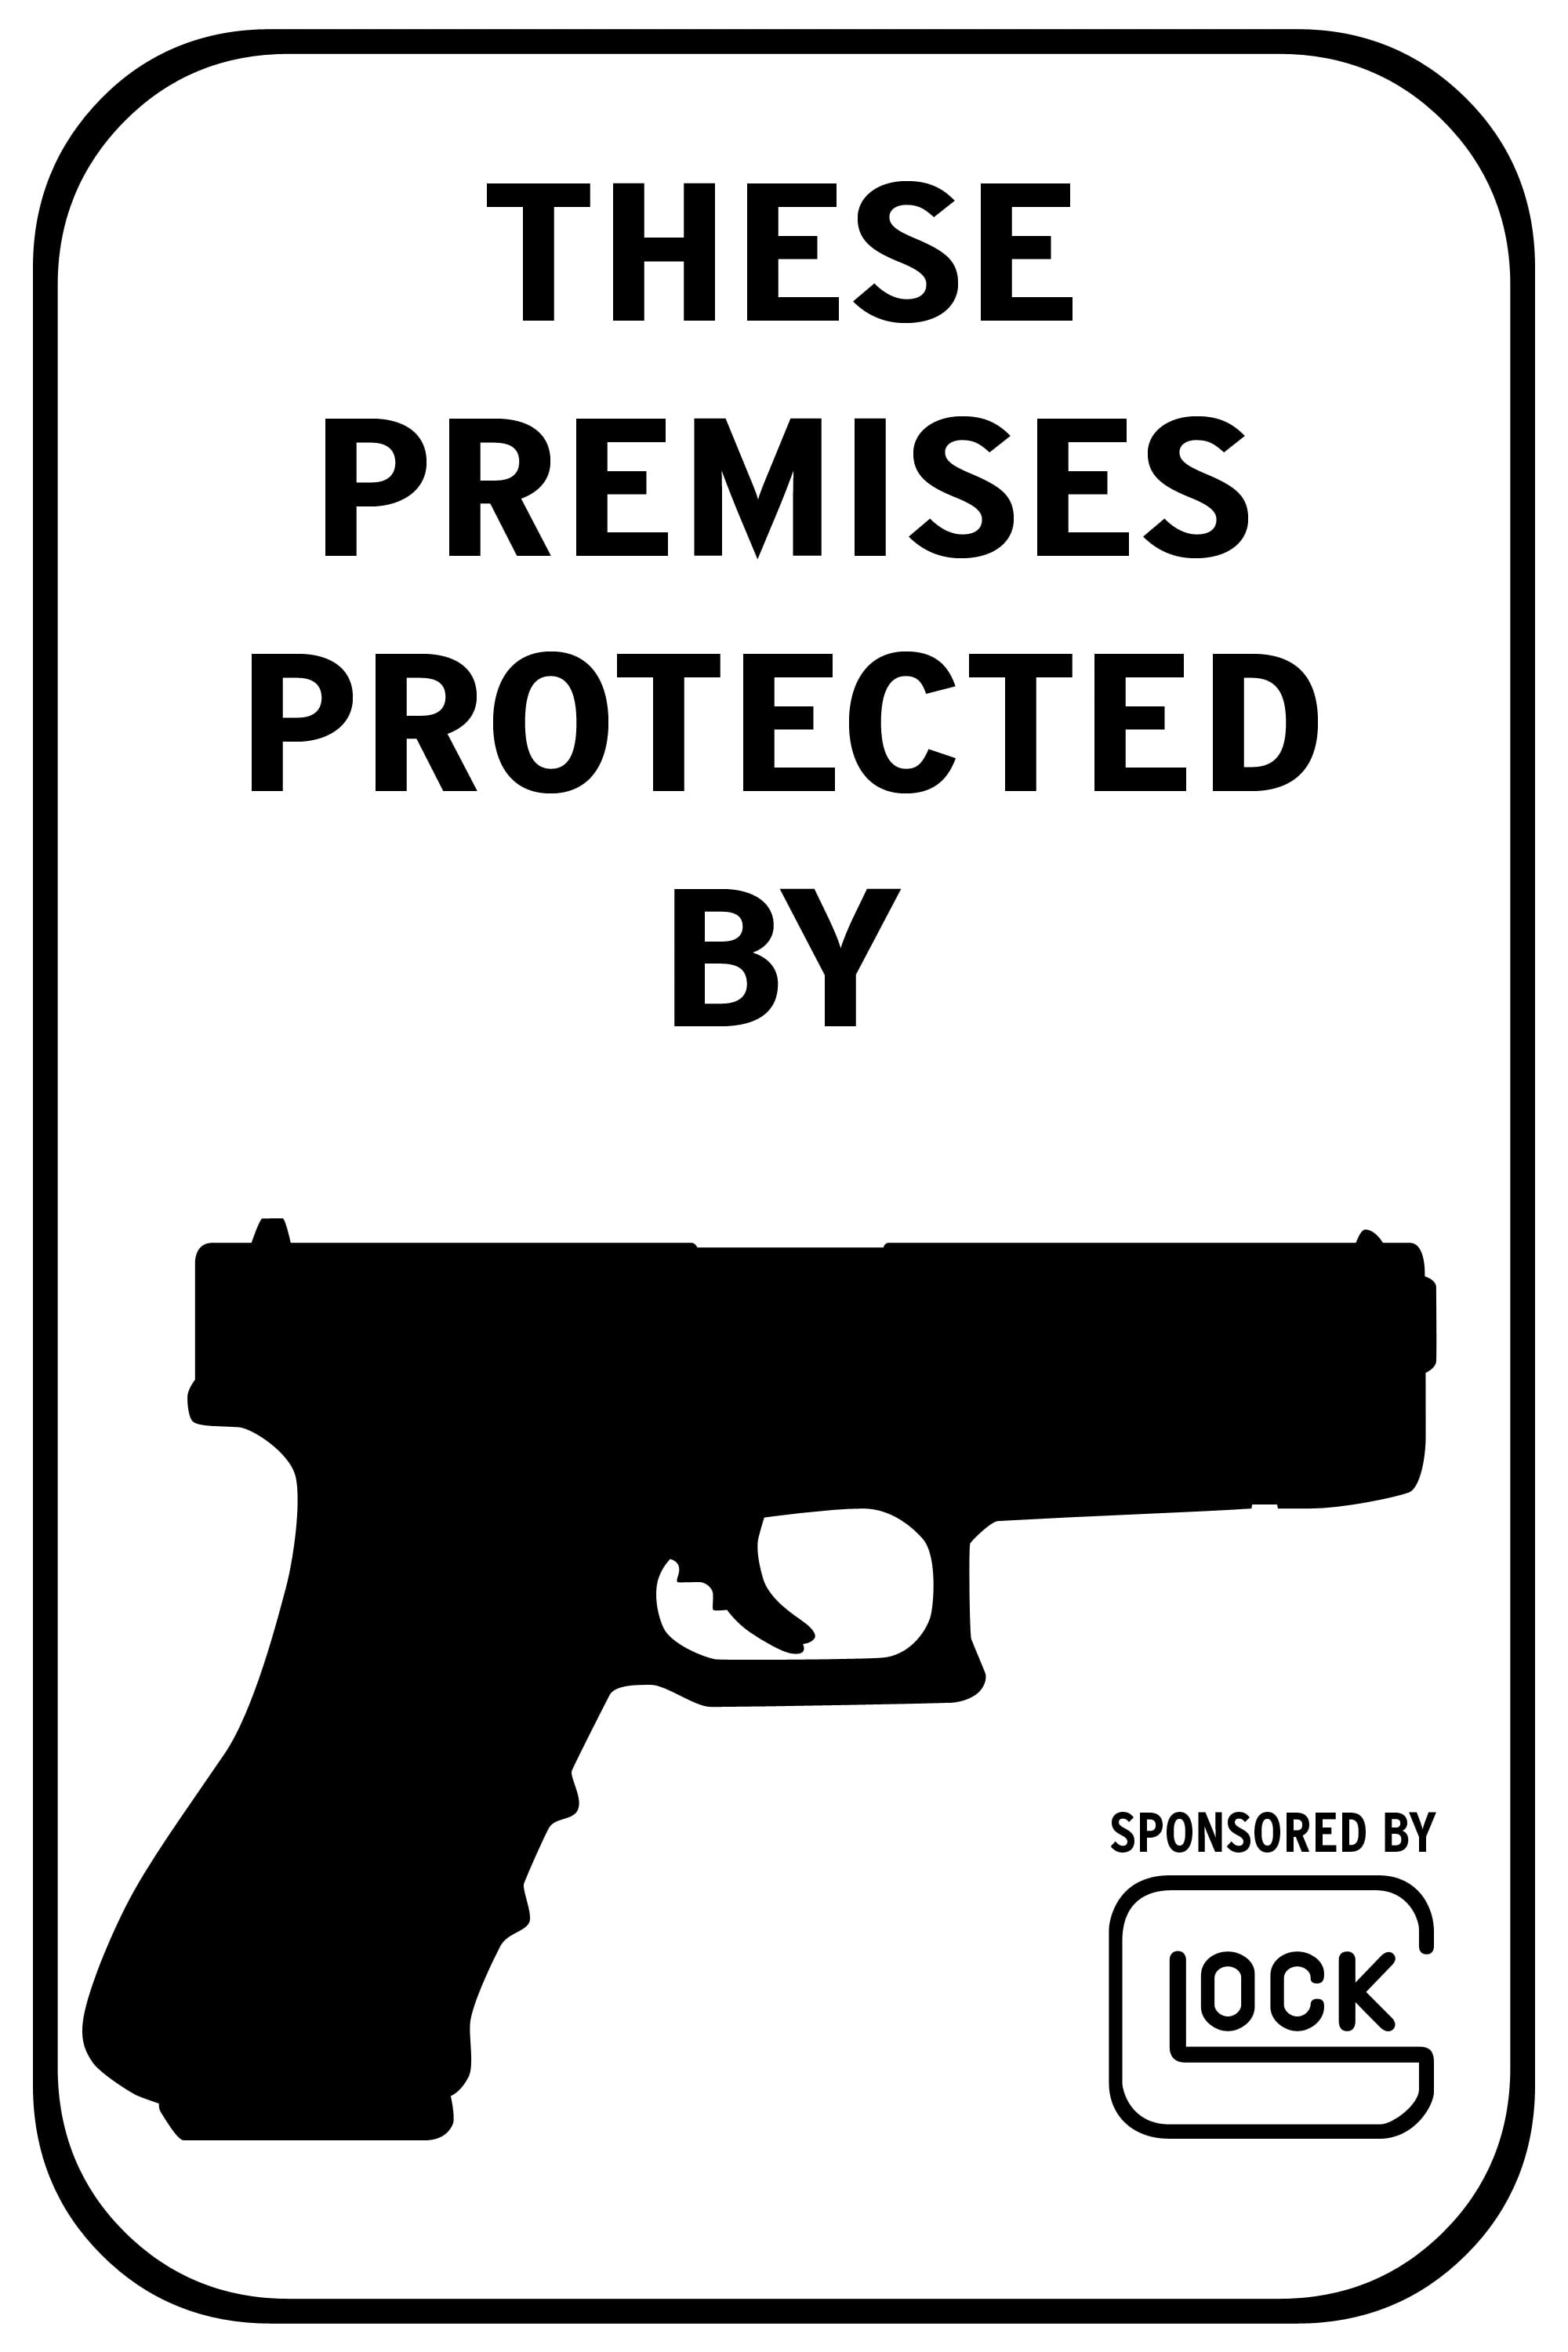 These Premises Protected by signage, gun